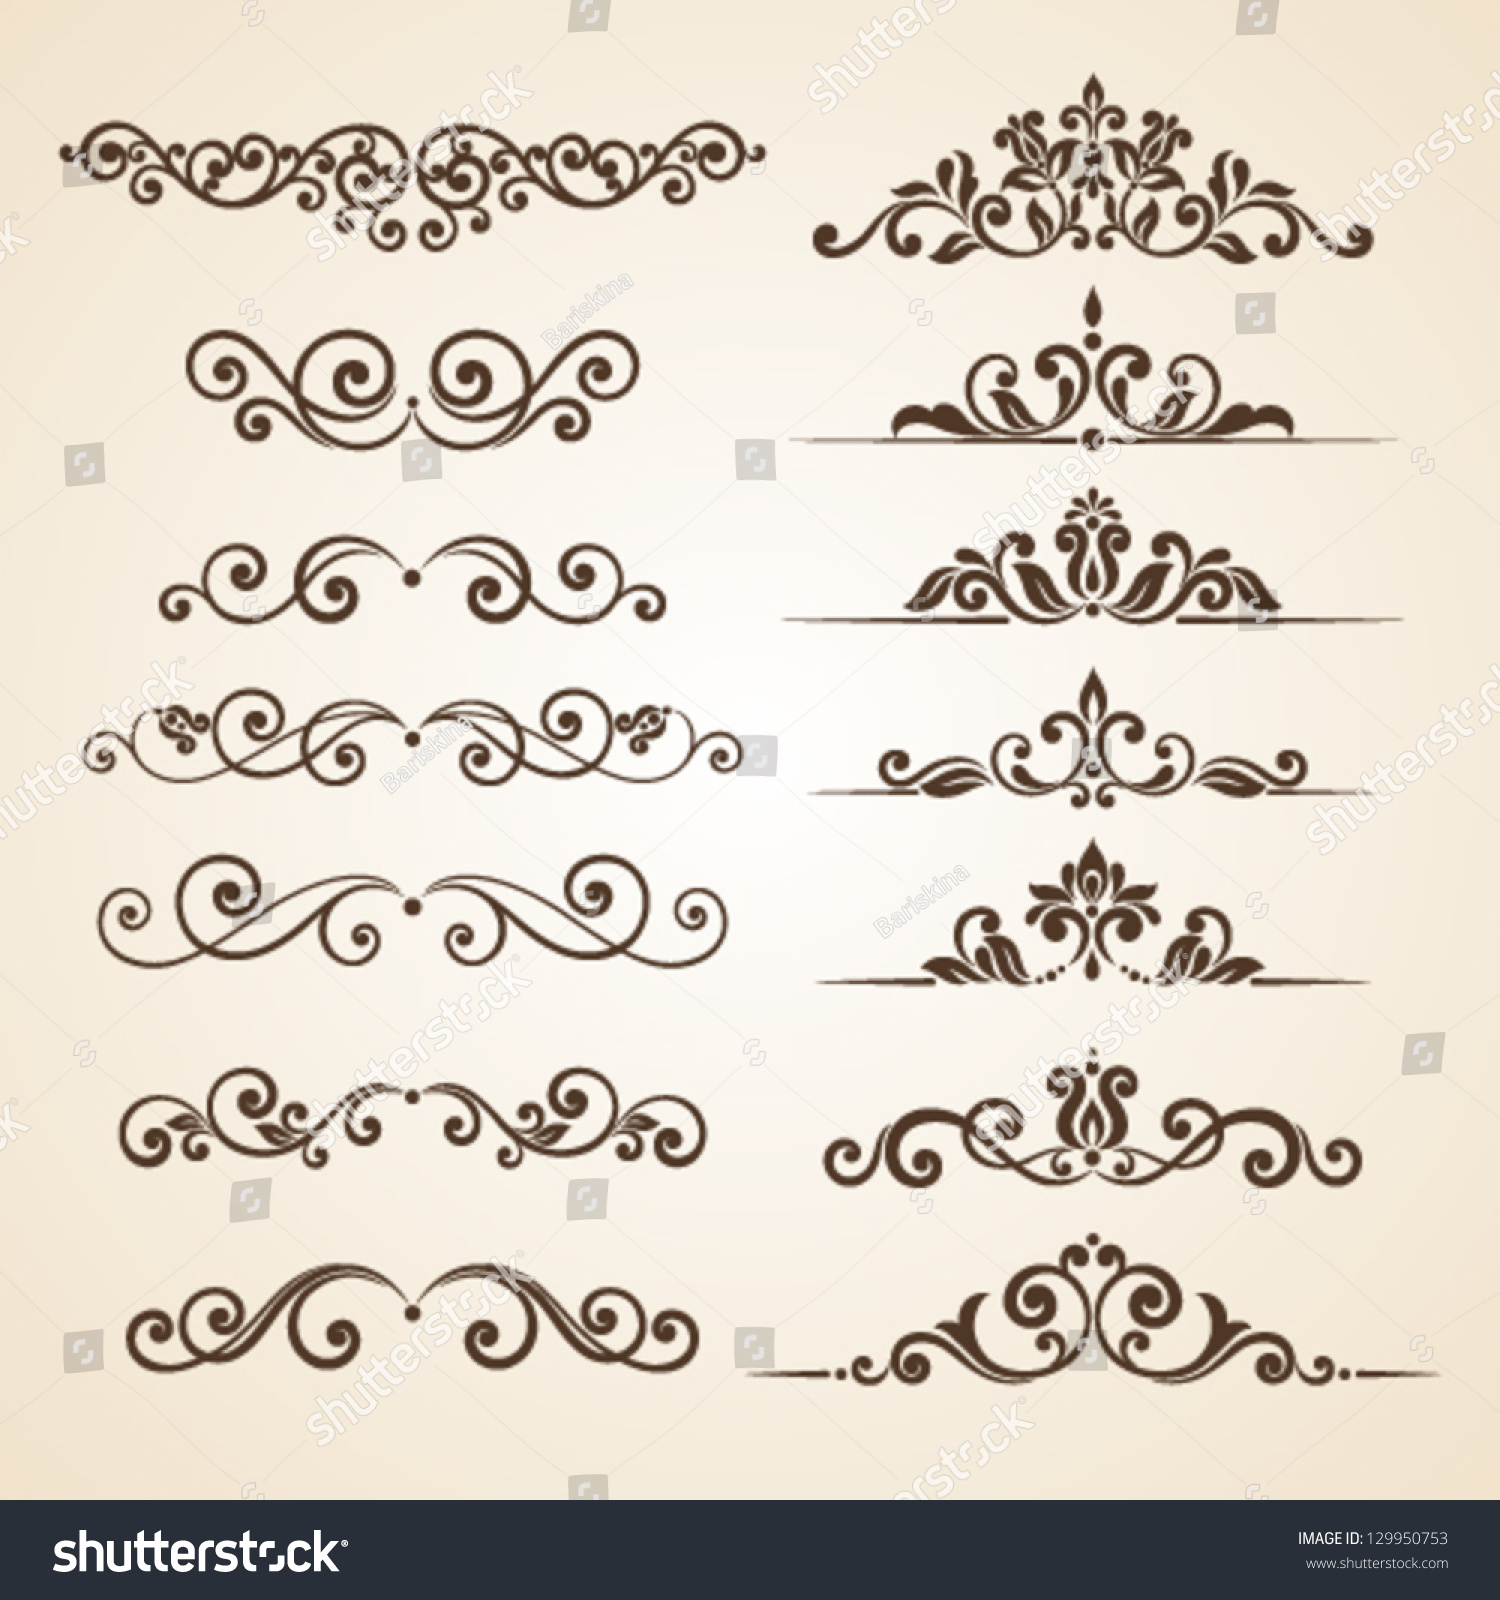 stock-vector-set-of-vintage-ornaments-with-floral-elements-129950753.jpg